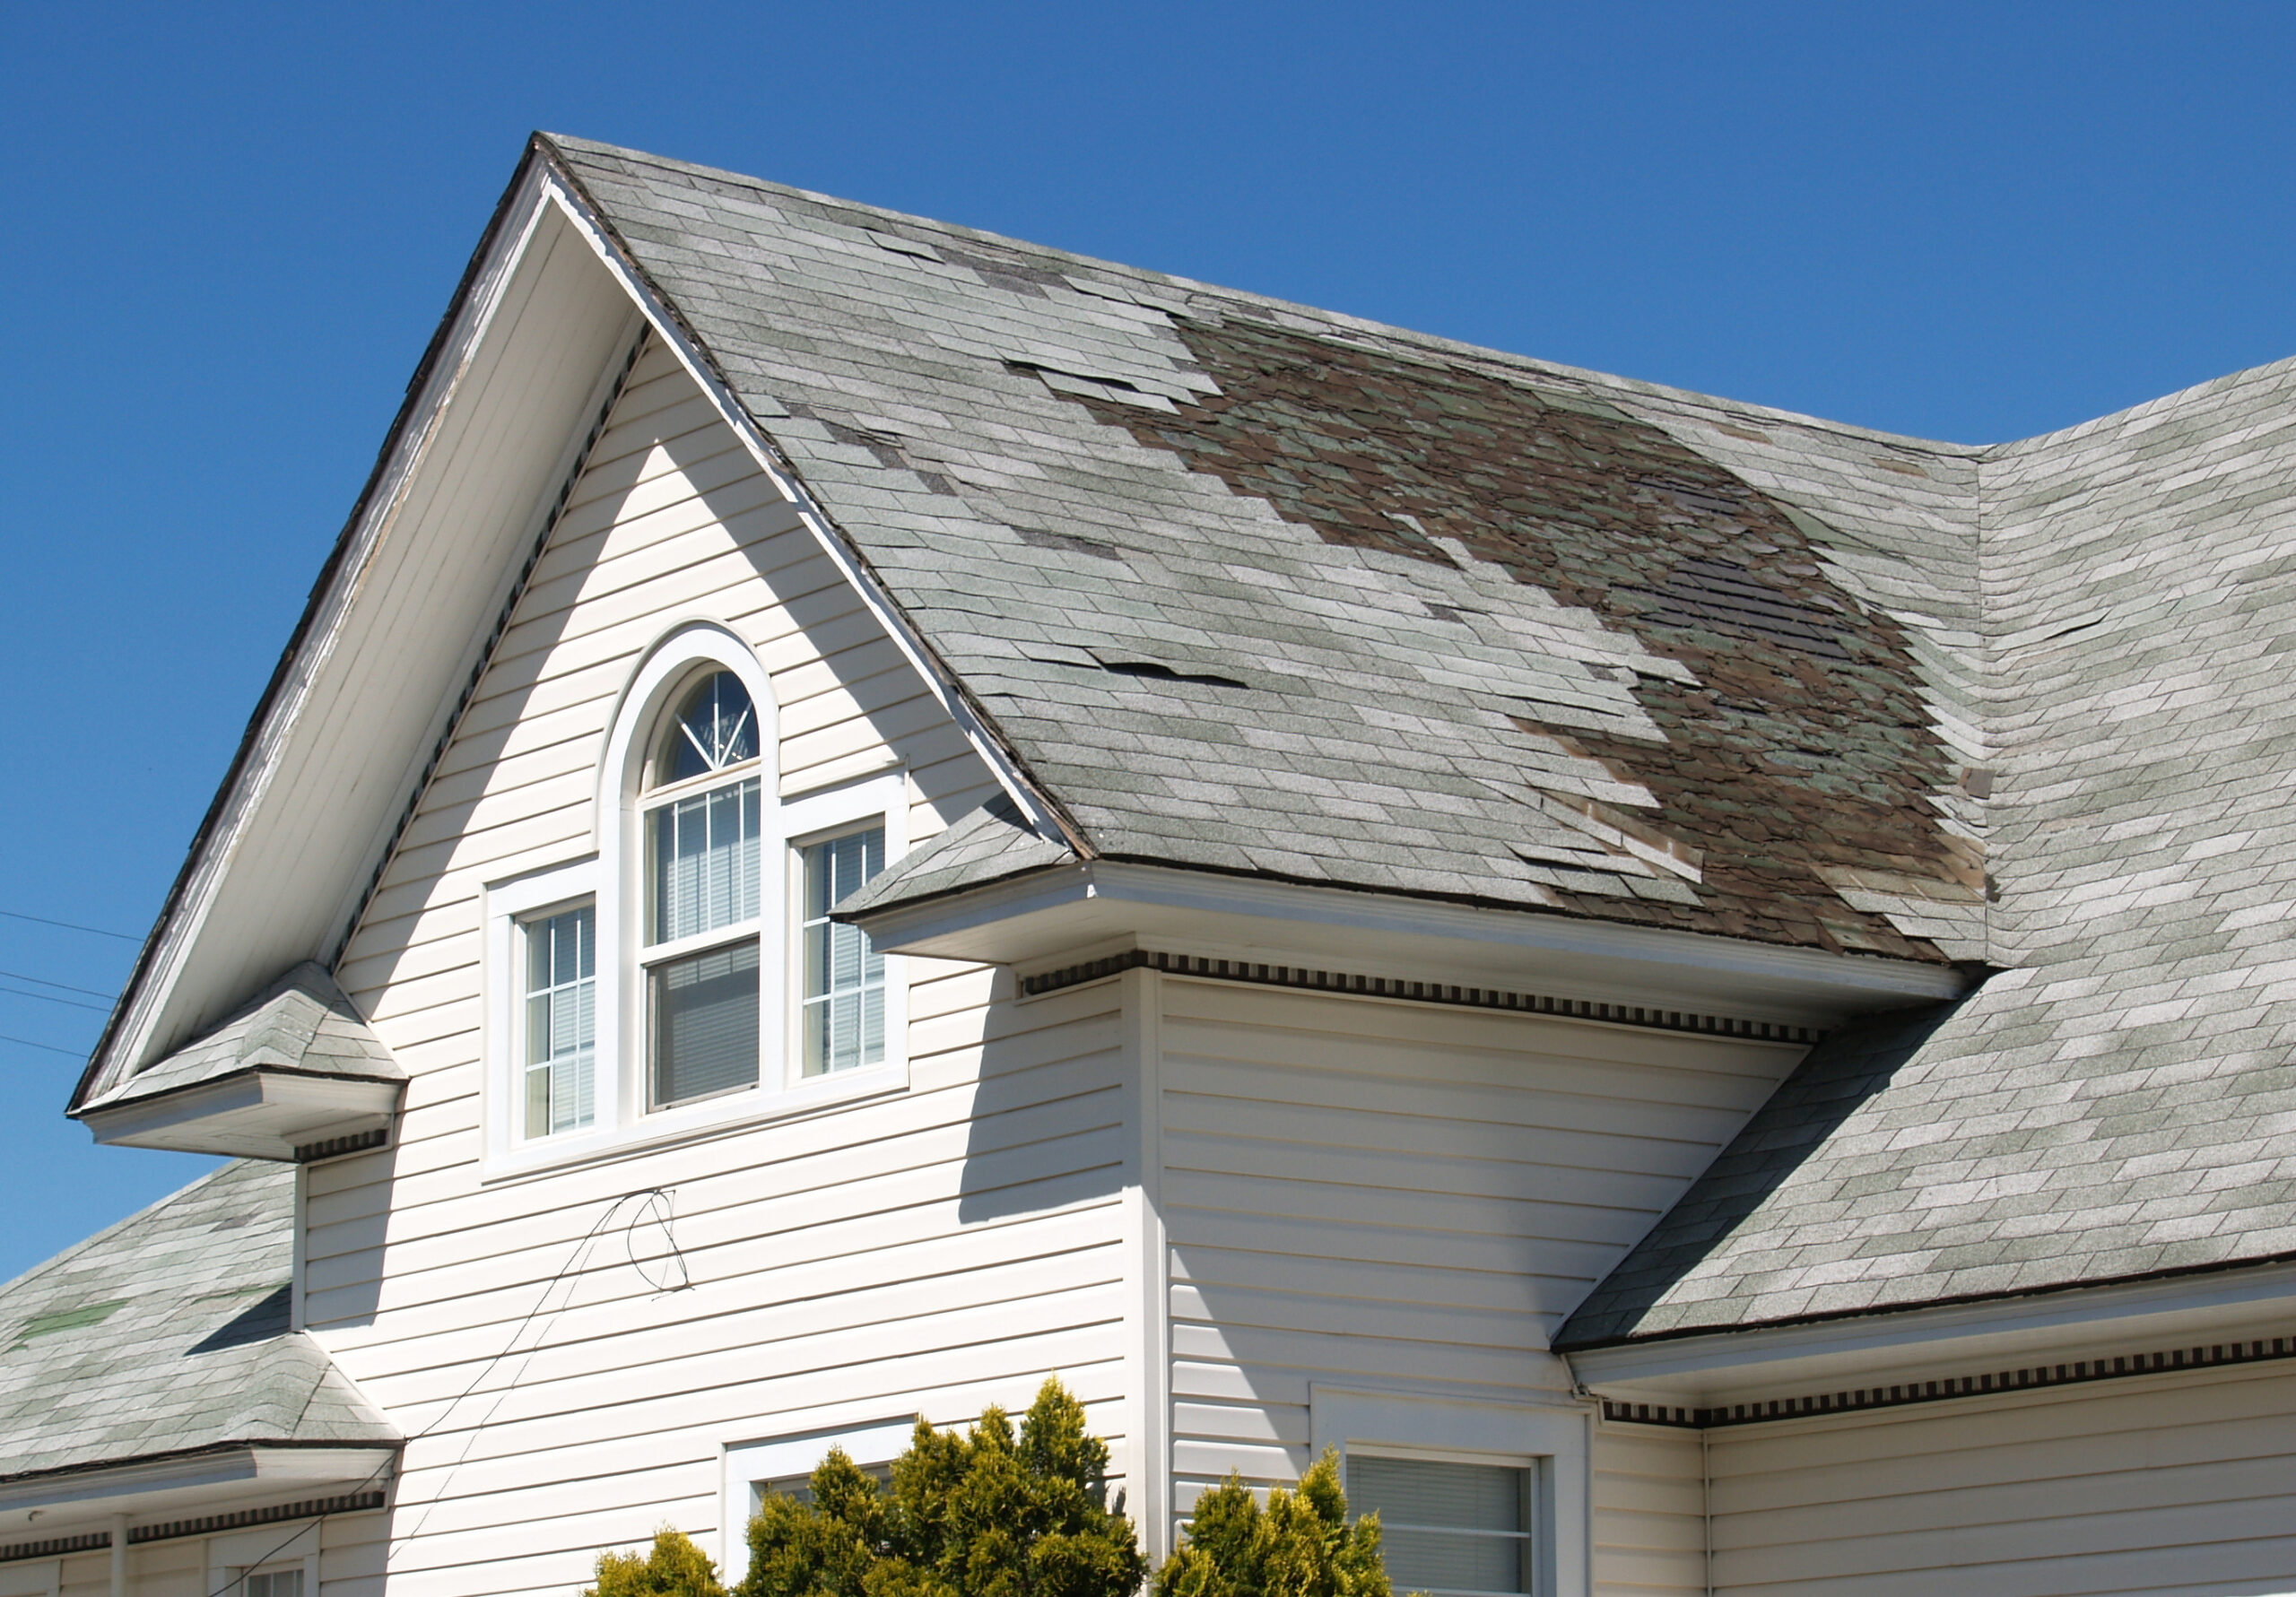 After roof damage like this, the last thing you want is your roof damage claim denied.